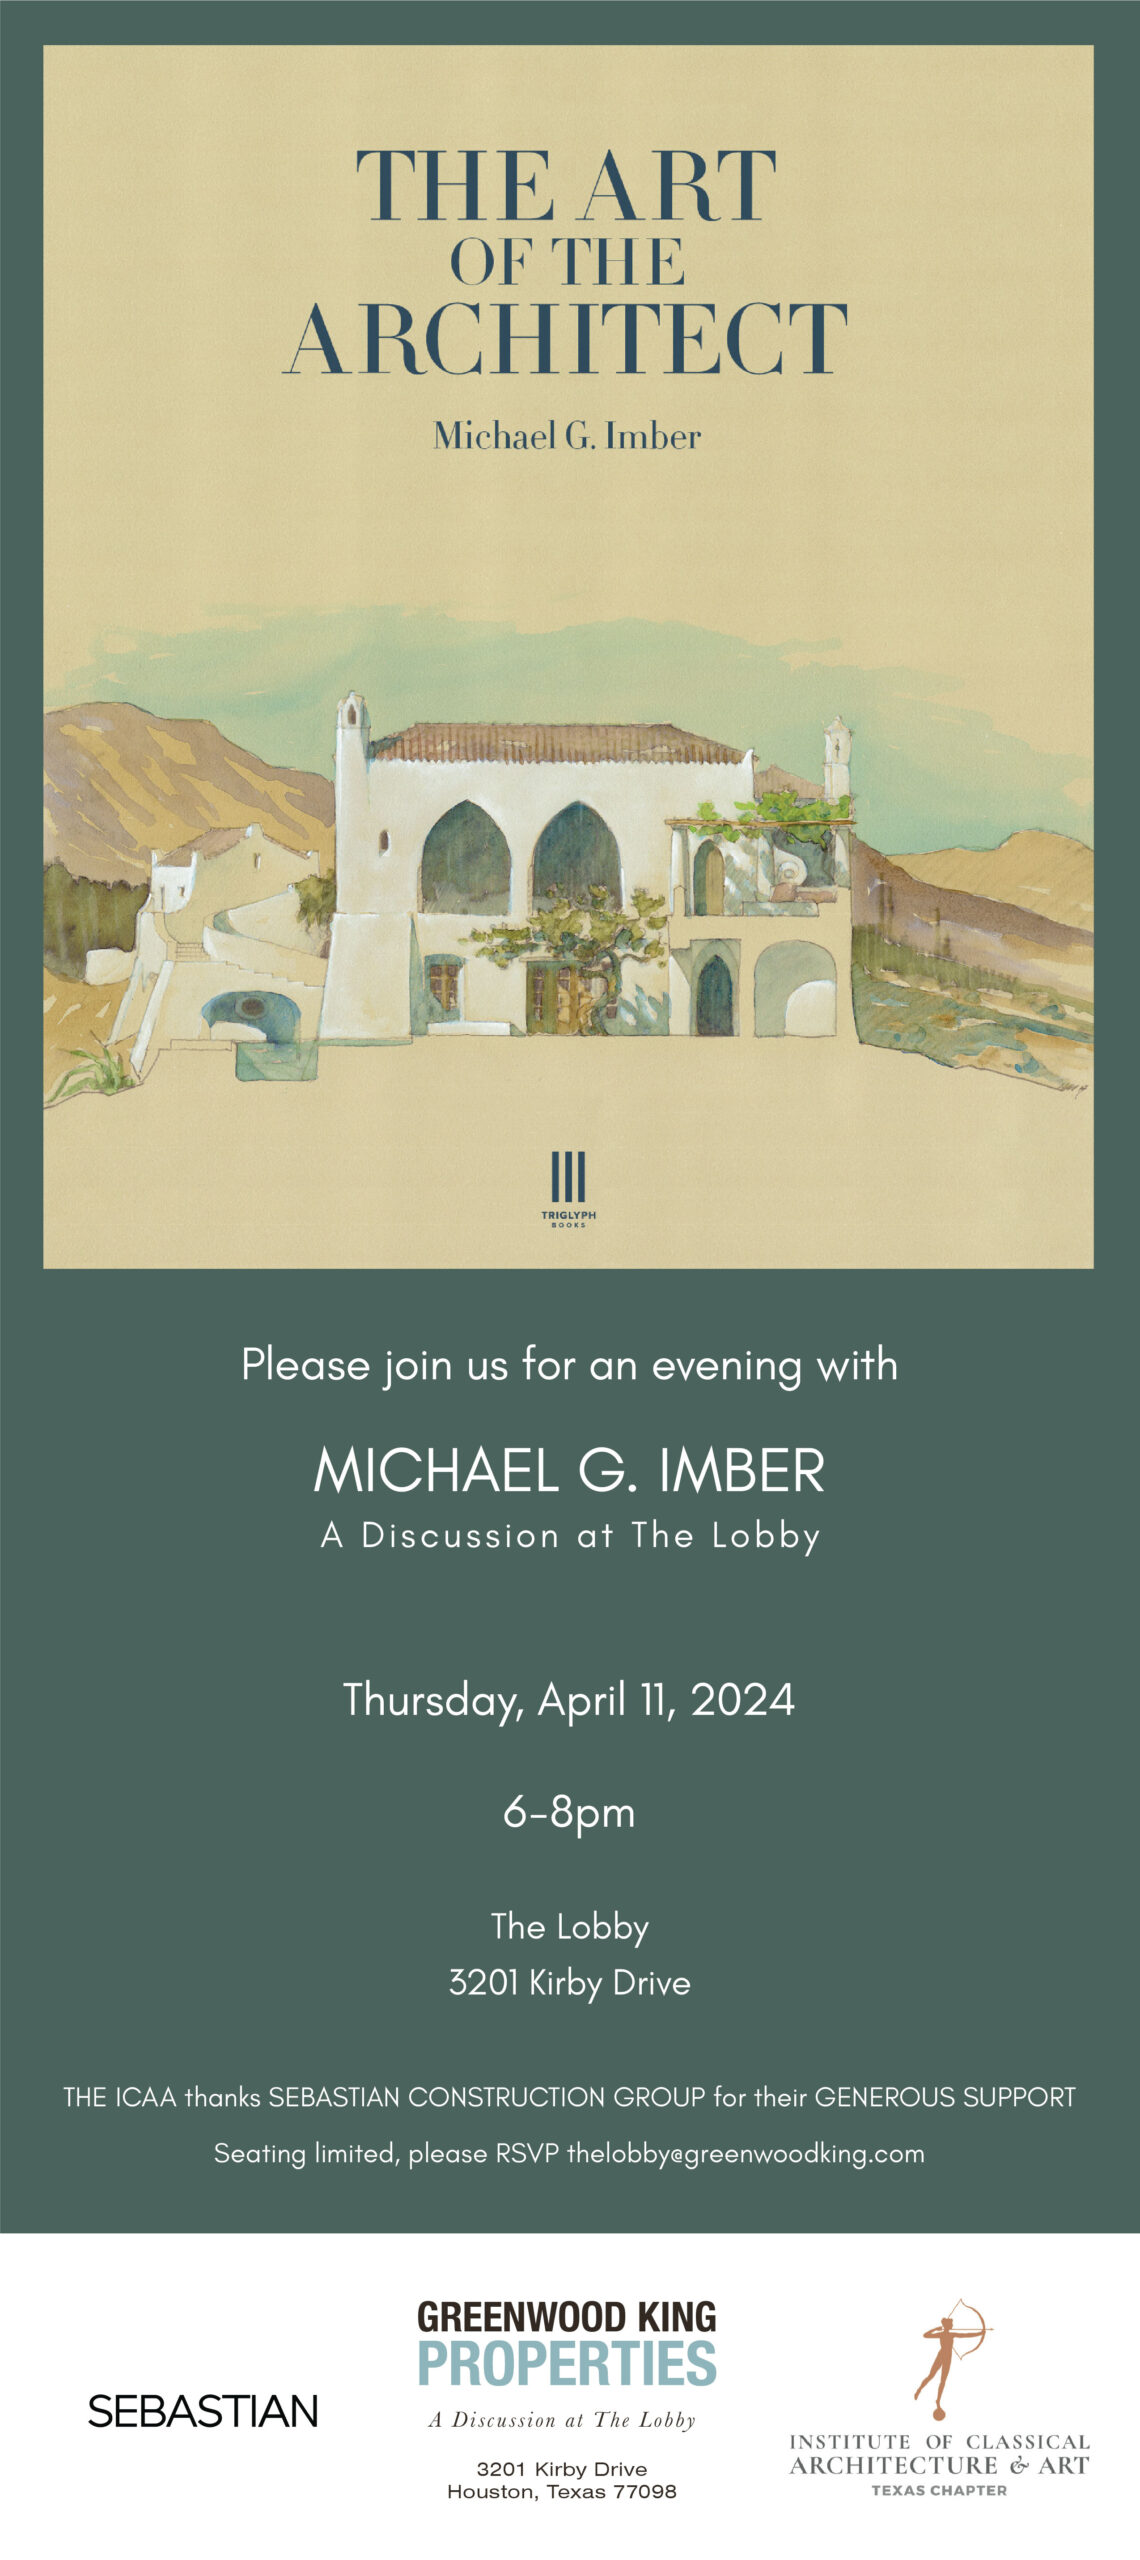 Michael G. Imber “The Art of the Architect” Lecture and Book Signing